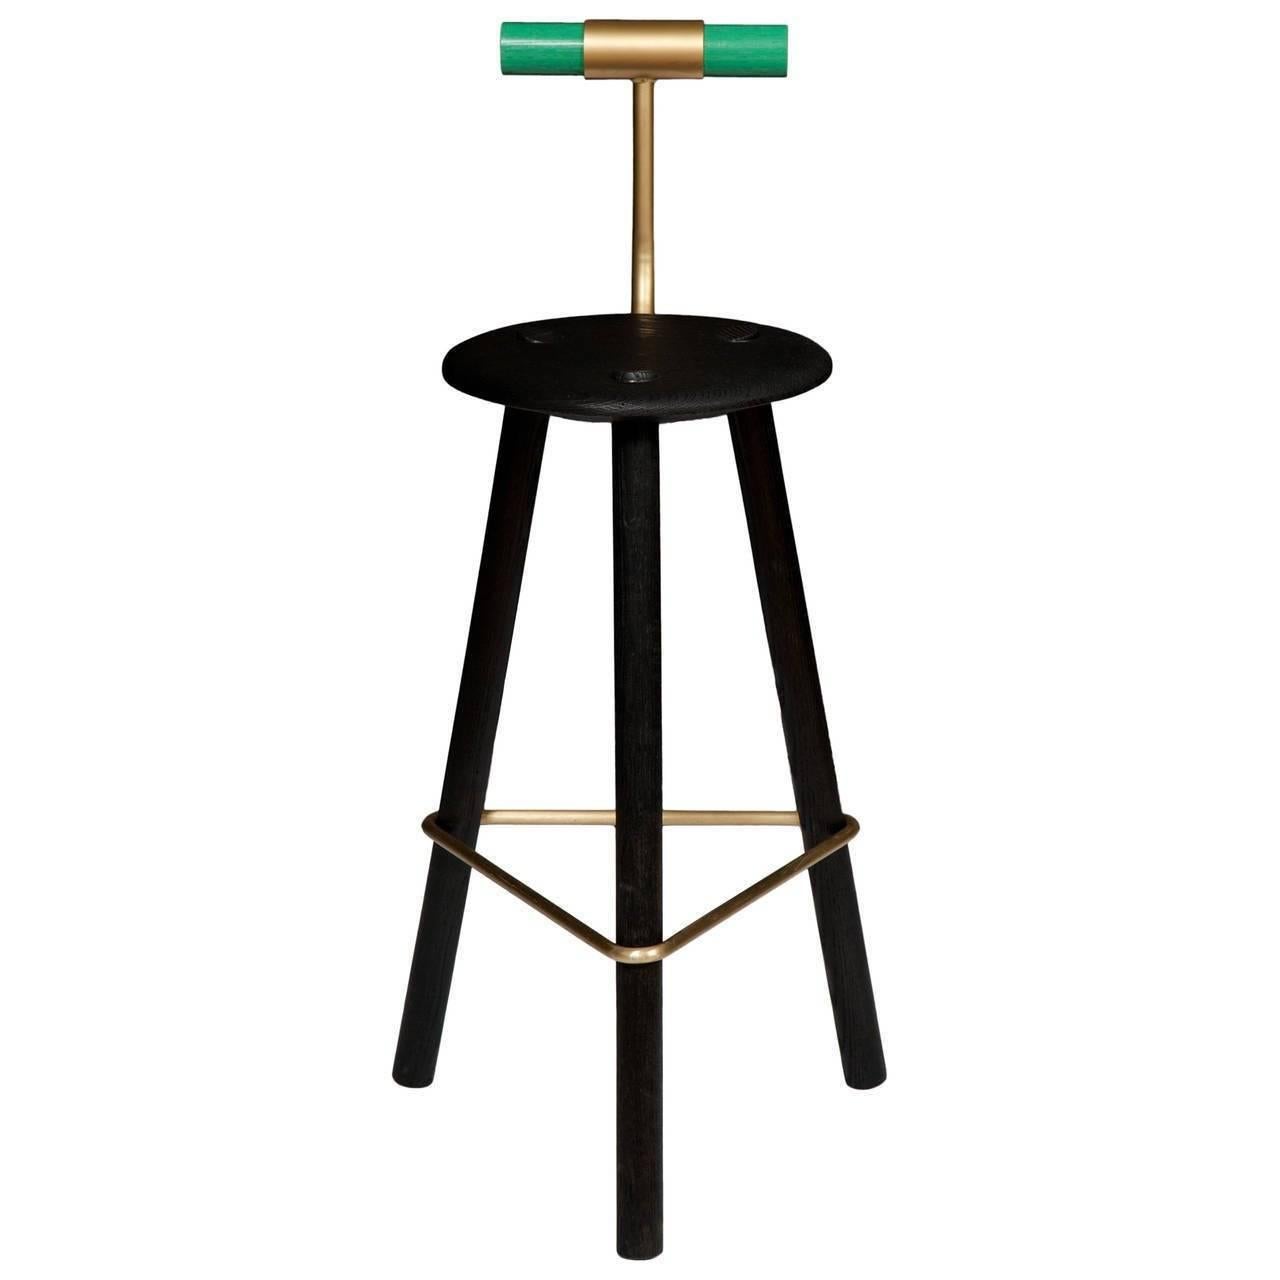 Charred ash tripod stool with lacquered ash backrest and satin brass supports.
Designed by Ben Erickson for Erickson Aesthetics.

Custom orders have a lead time of 10-12 weeks FOB NYC. Lead time contingent upon selection of finishes, approval of